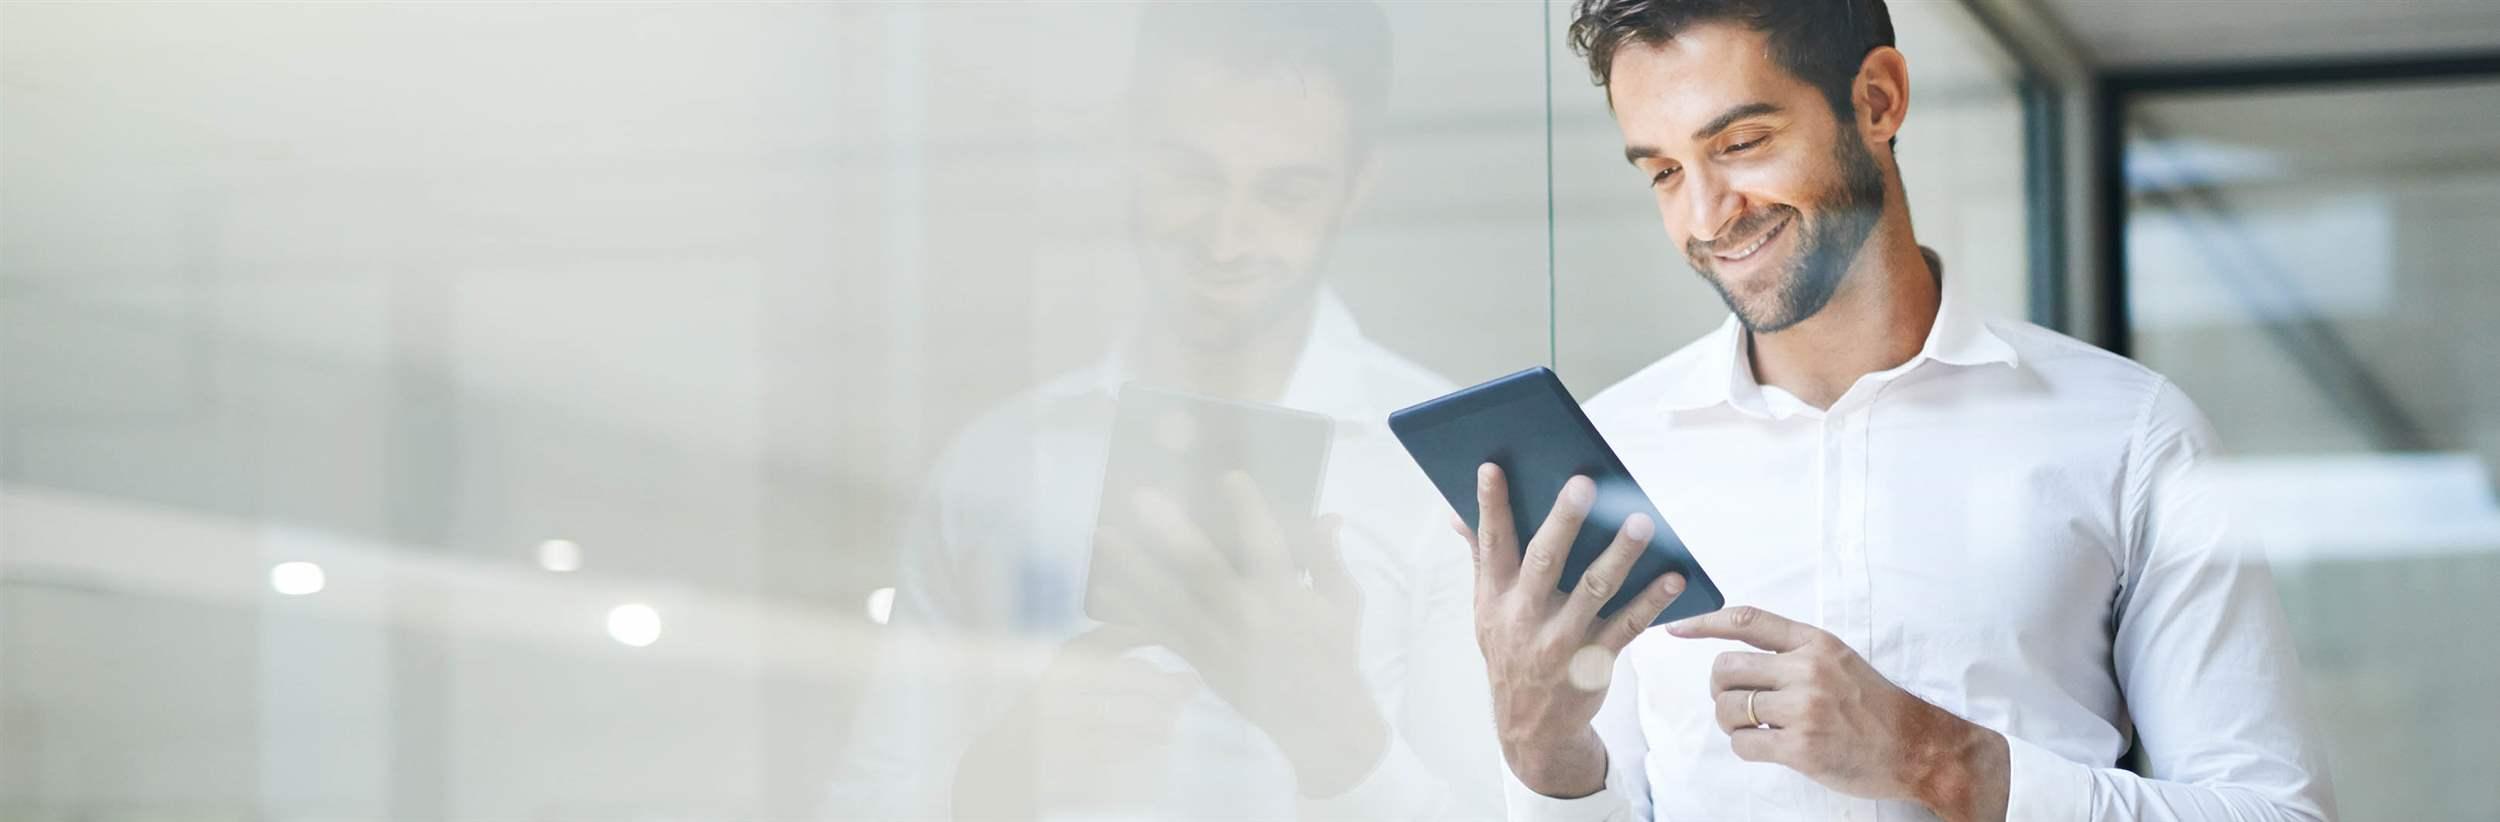 Cropped shot of a young businessman using a digital tablet in his office